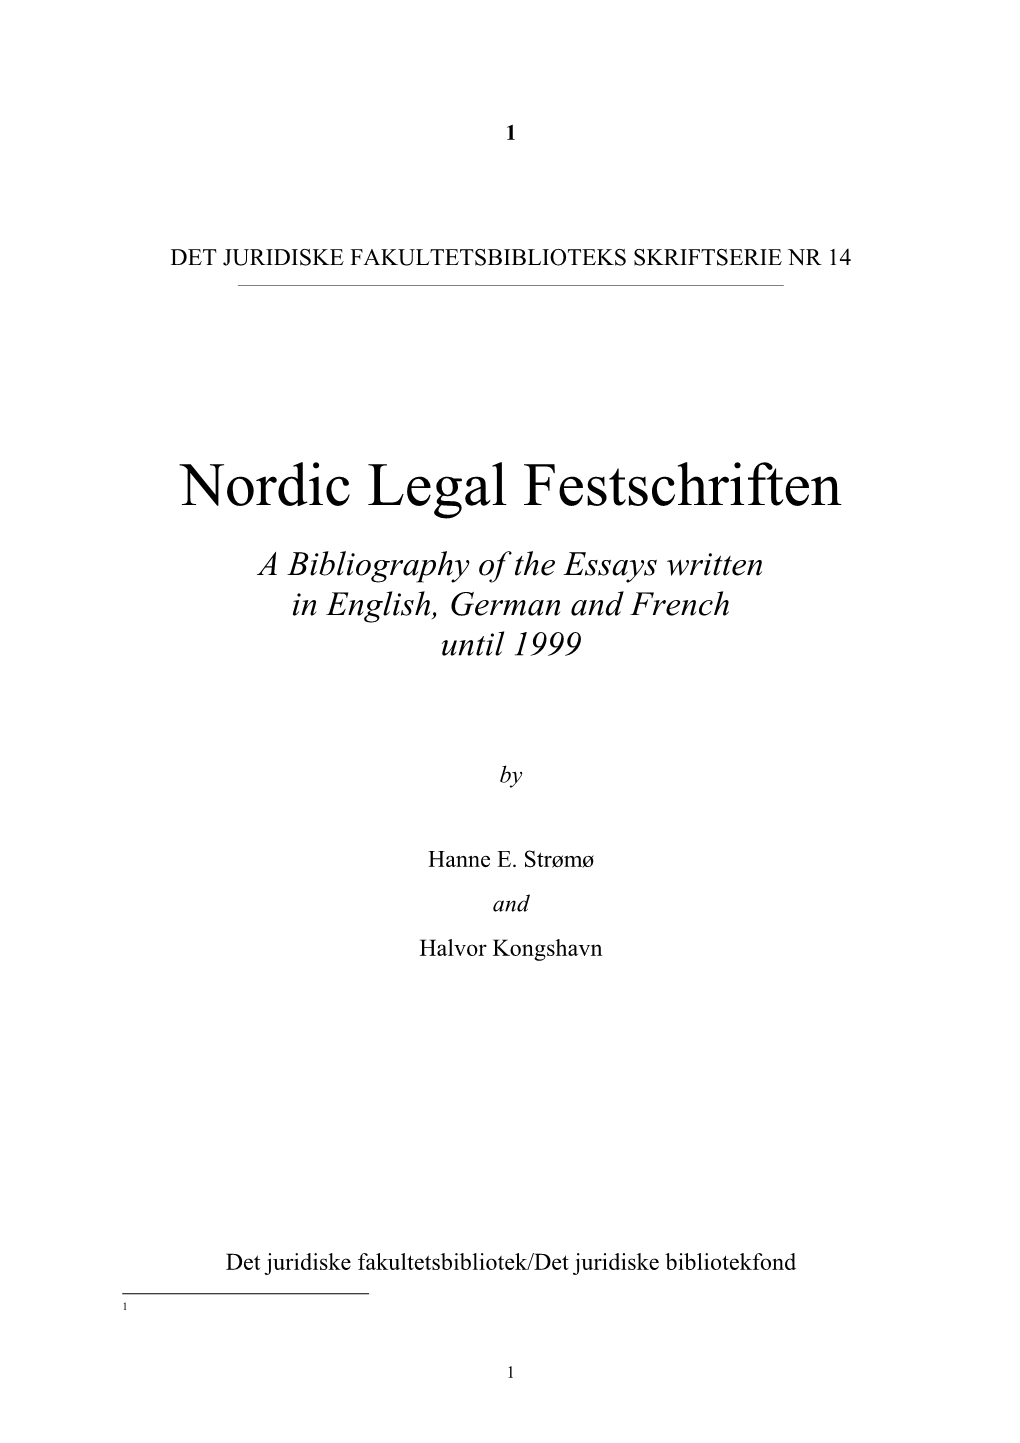 Nordic Legal Festschriften a Bibliography of the Essays Written in English, German and French Until 1999